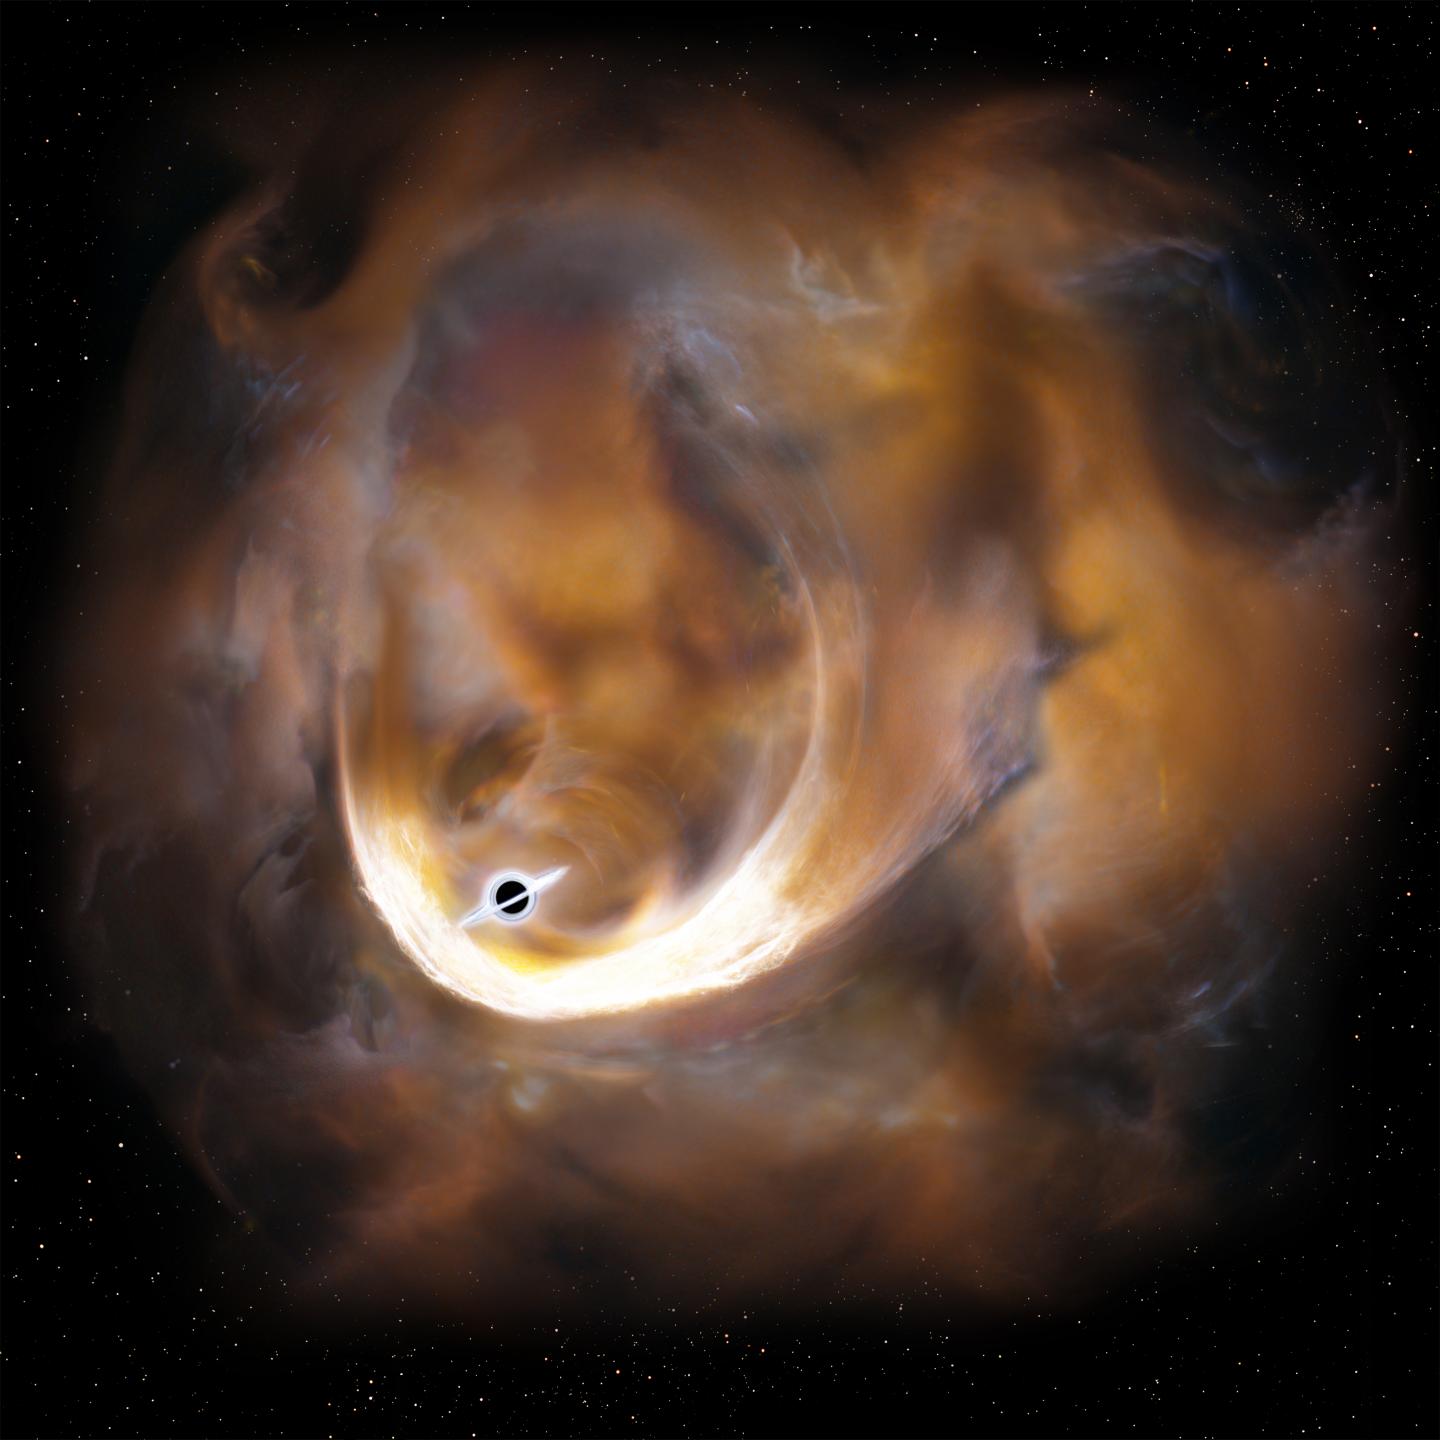 Artist's Impression of the Clouds Scattered by An Intermediate Mass Black Hole